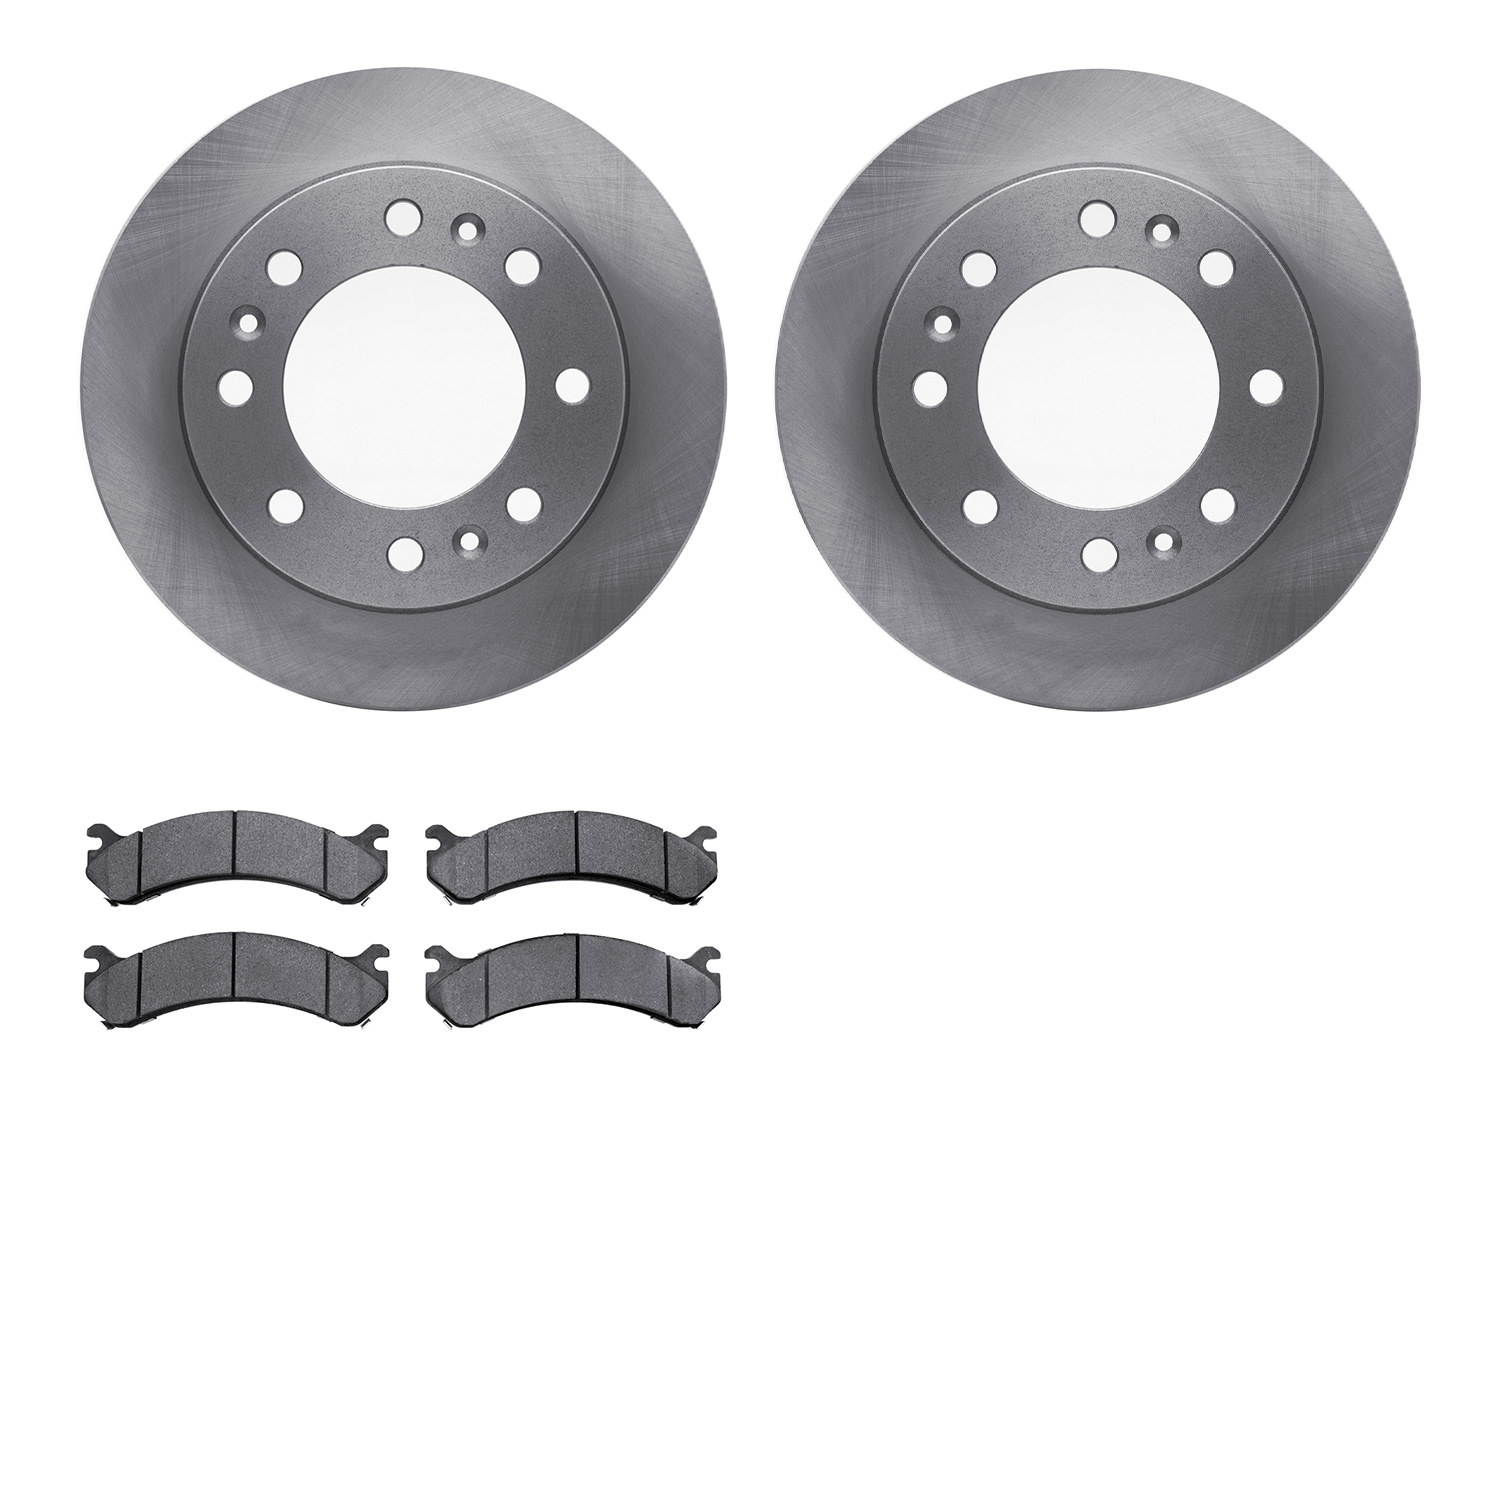 6402-46019 Brake Rotors with Ultimate-Duty Brake Pads, 2006-2011 GM, Position: Front